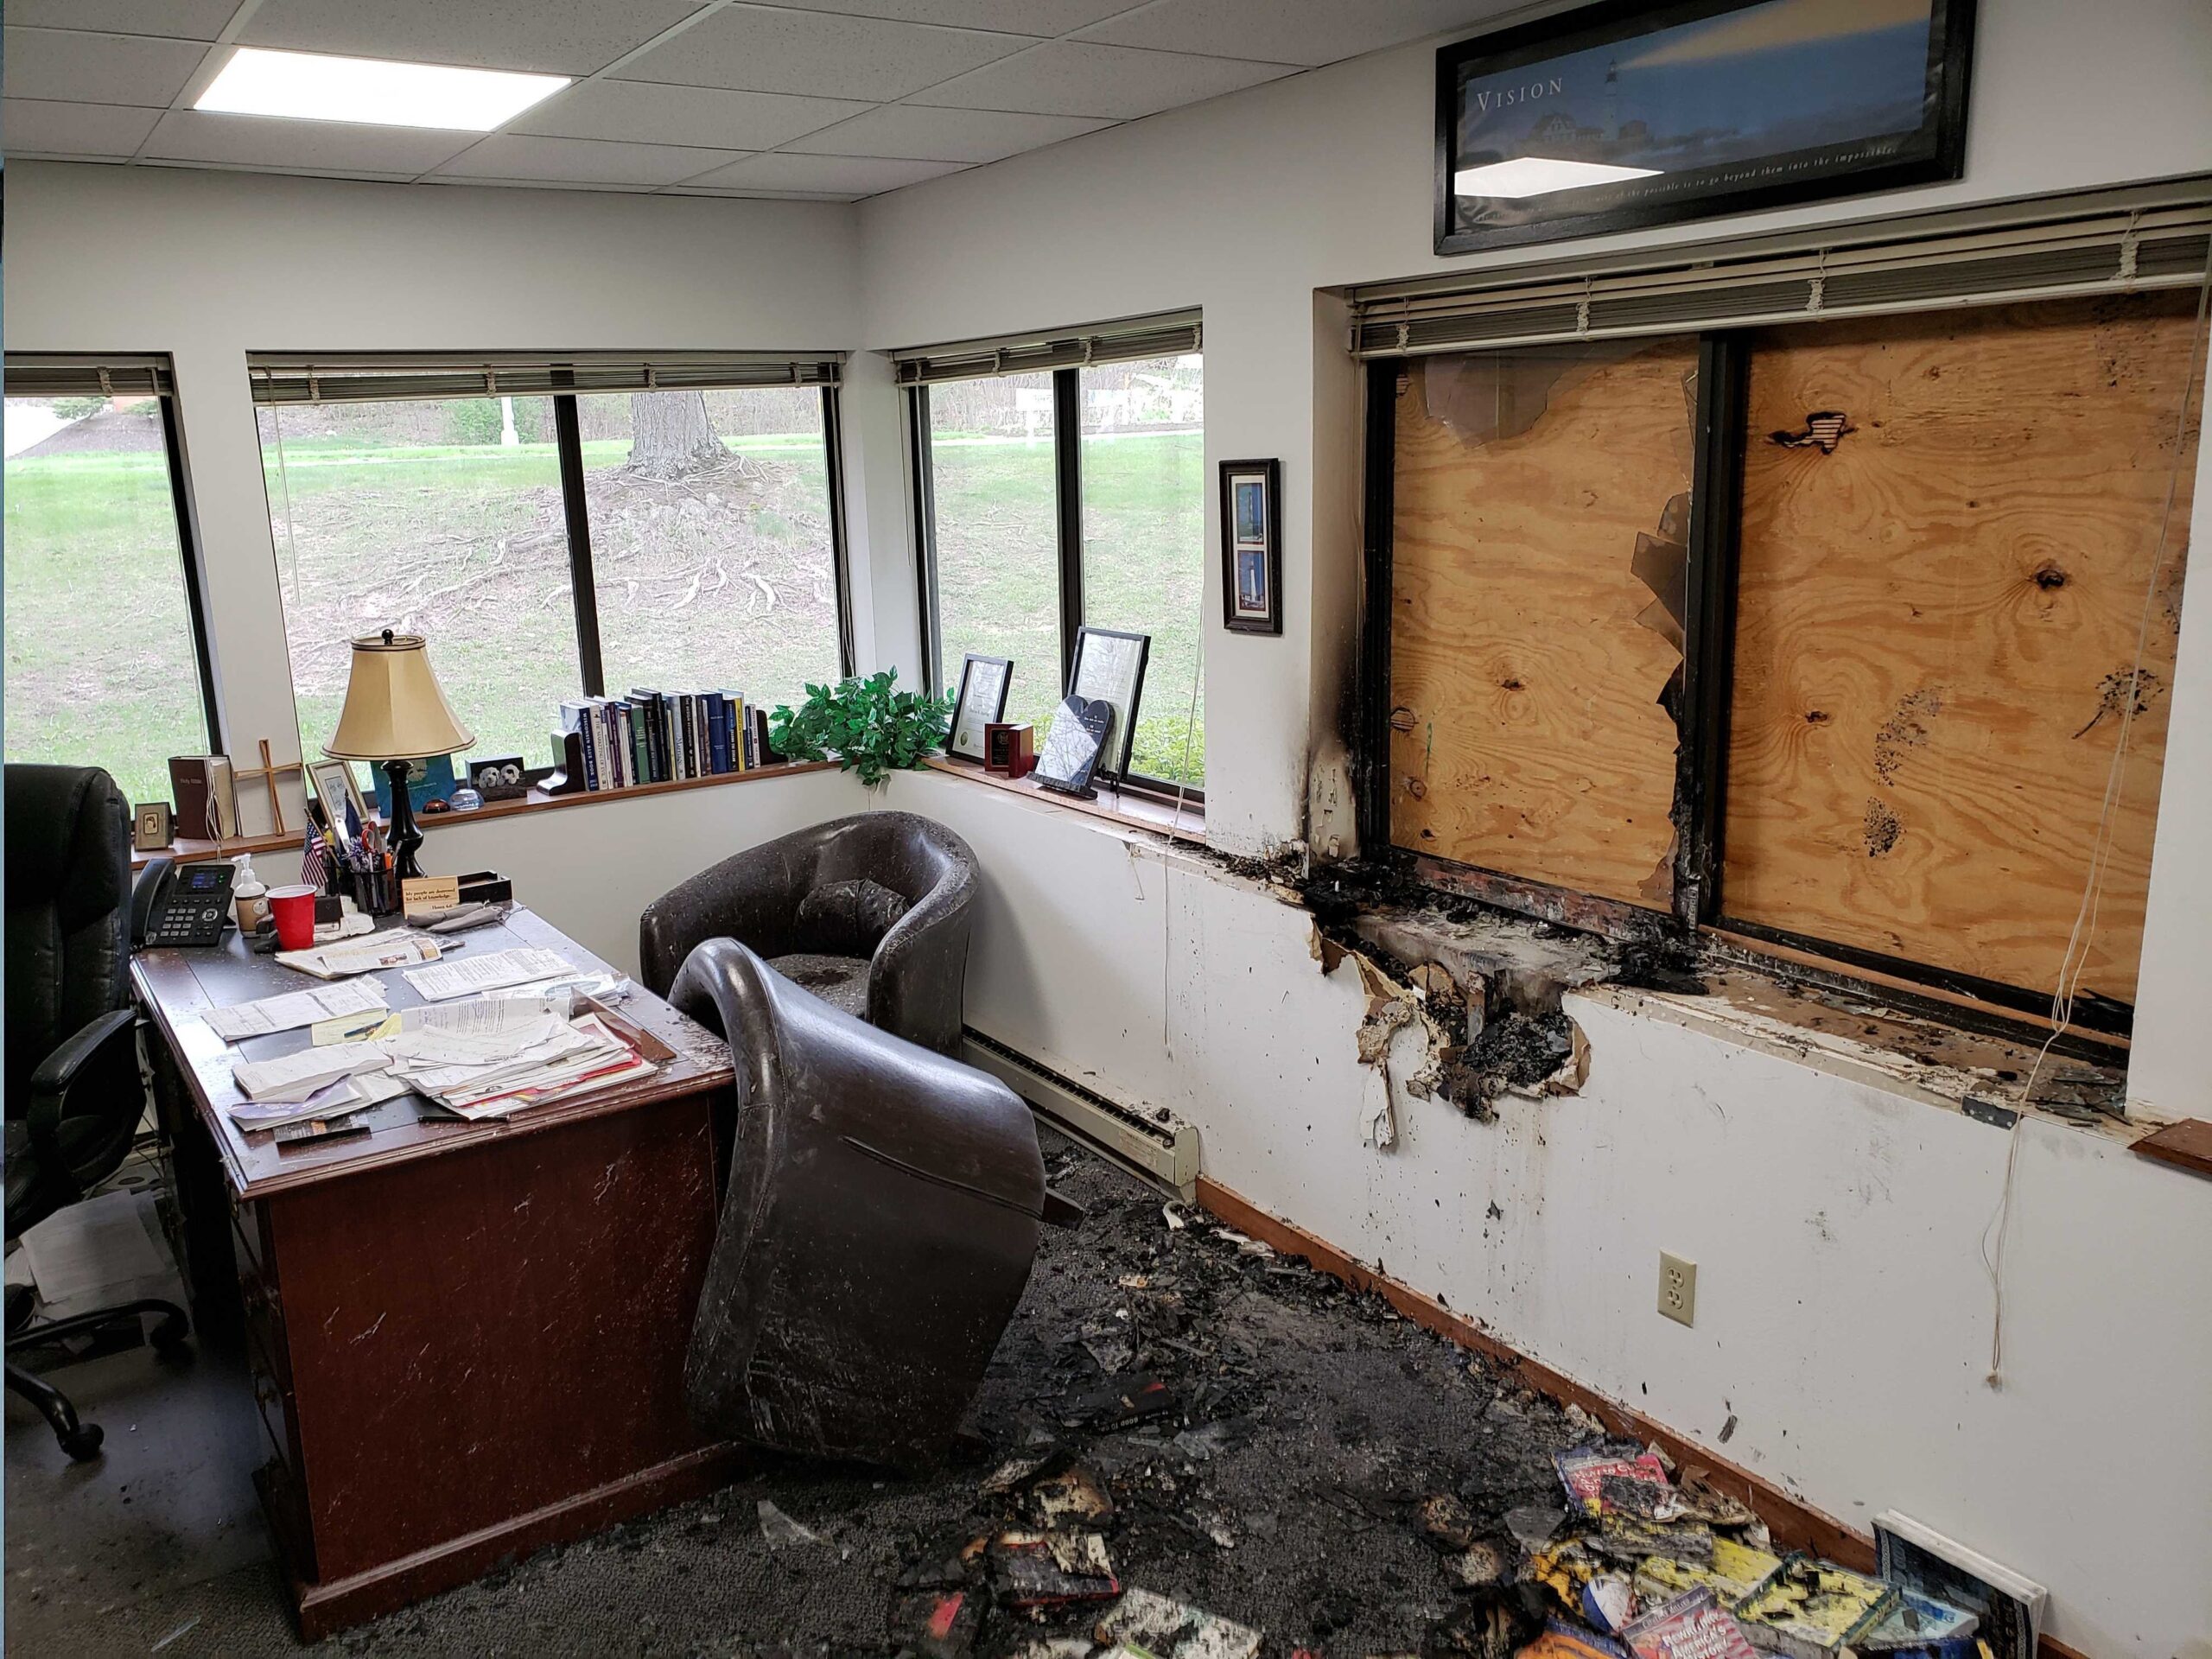 Man agrees to plead guilty to firebombing office of Wisconsin anti-abortion group